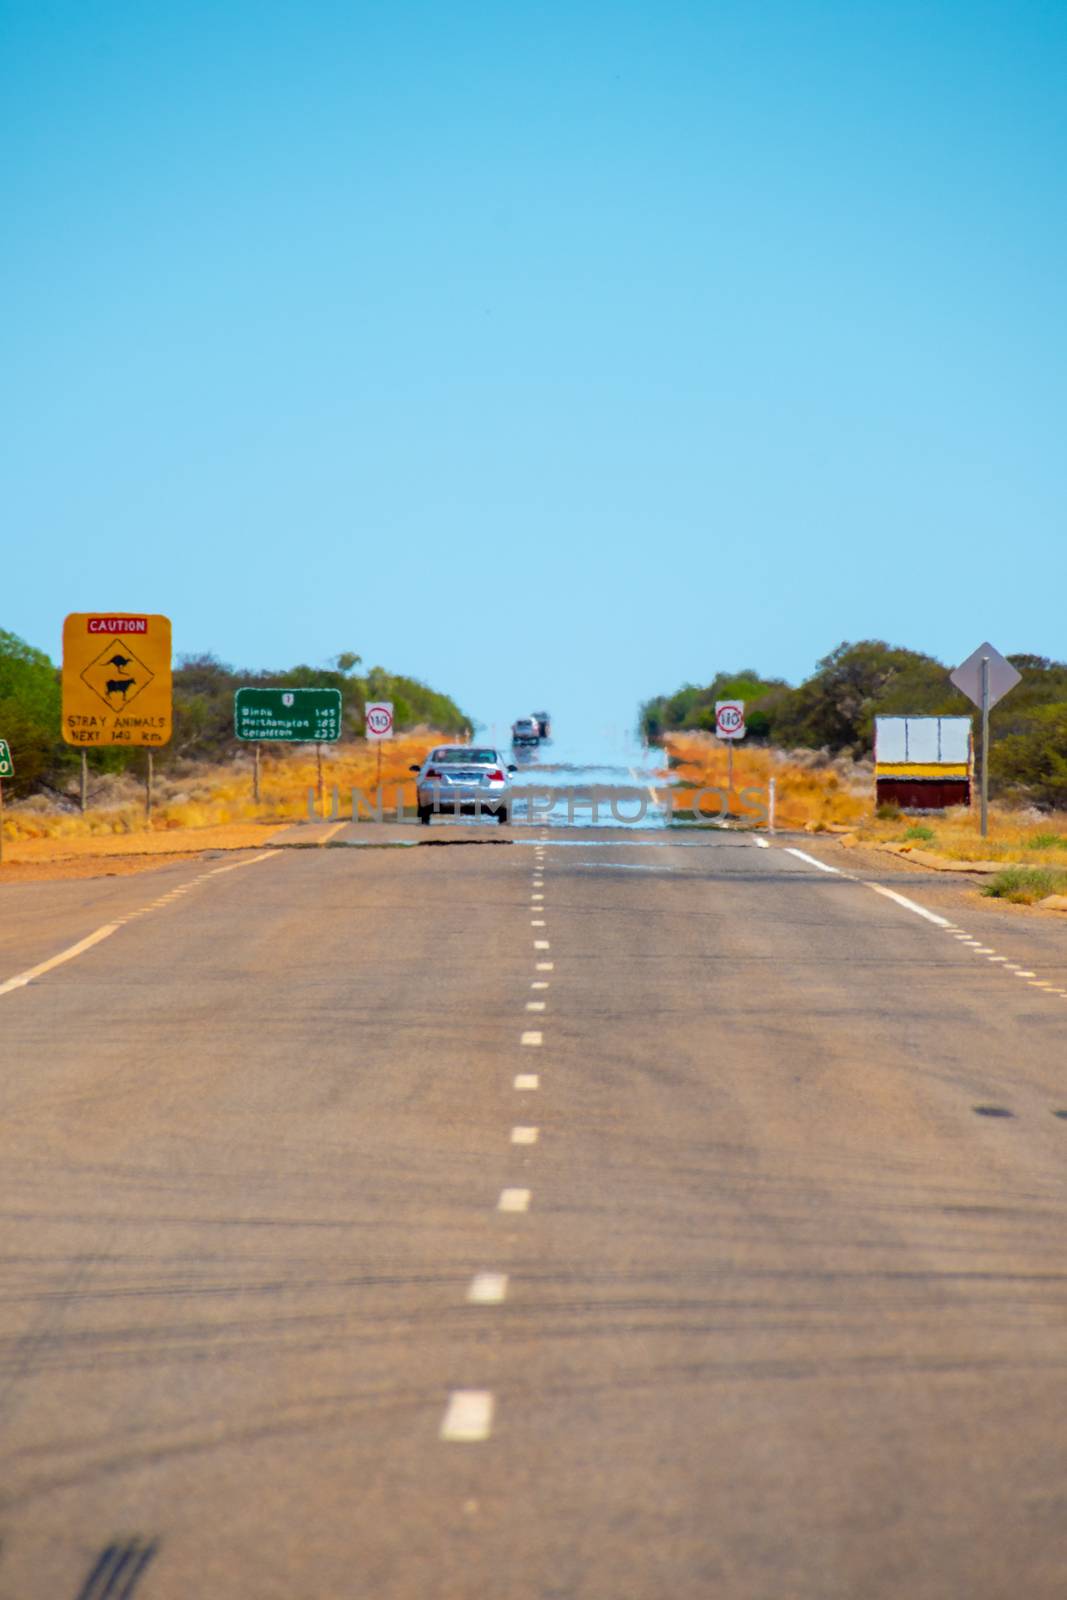 Mirage on an endless straight road in Western Australia